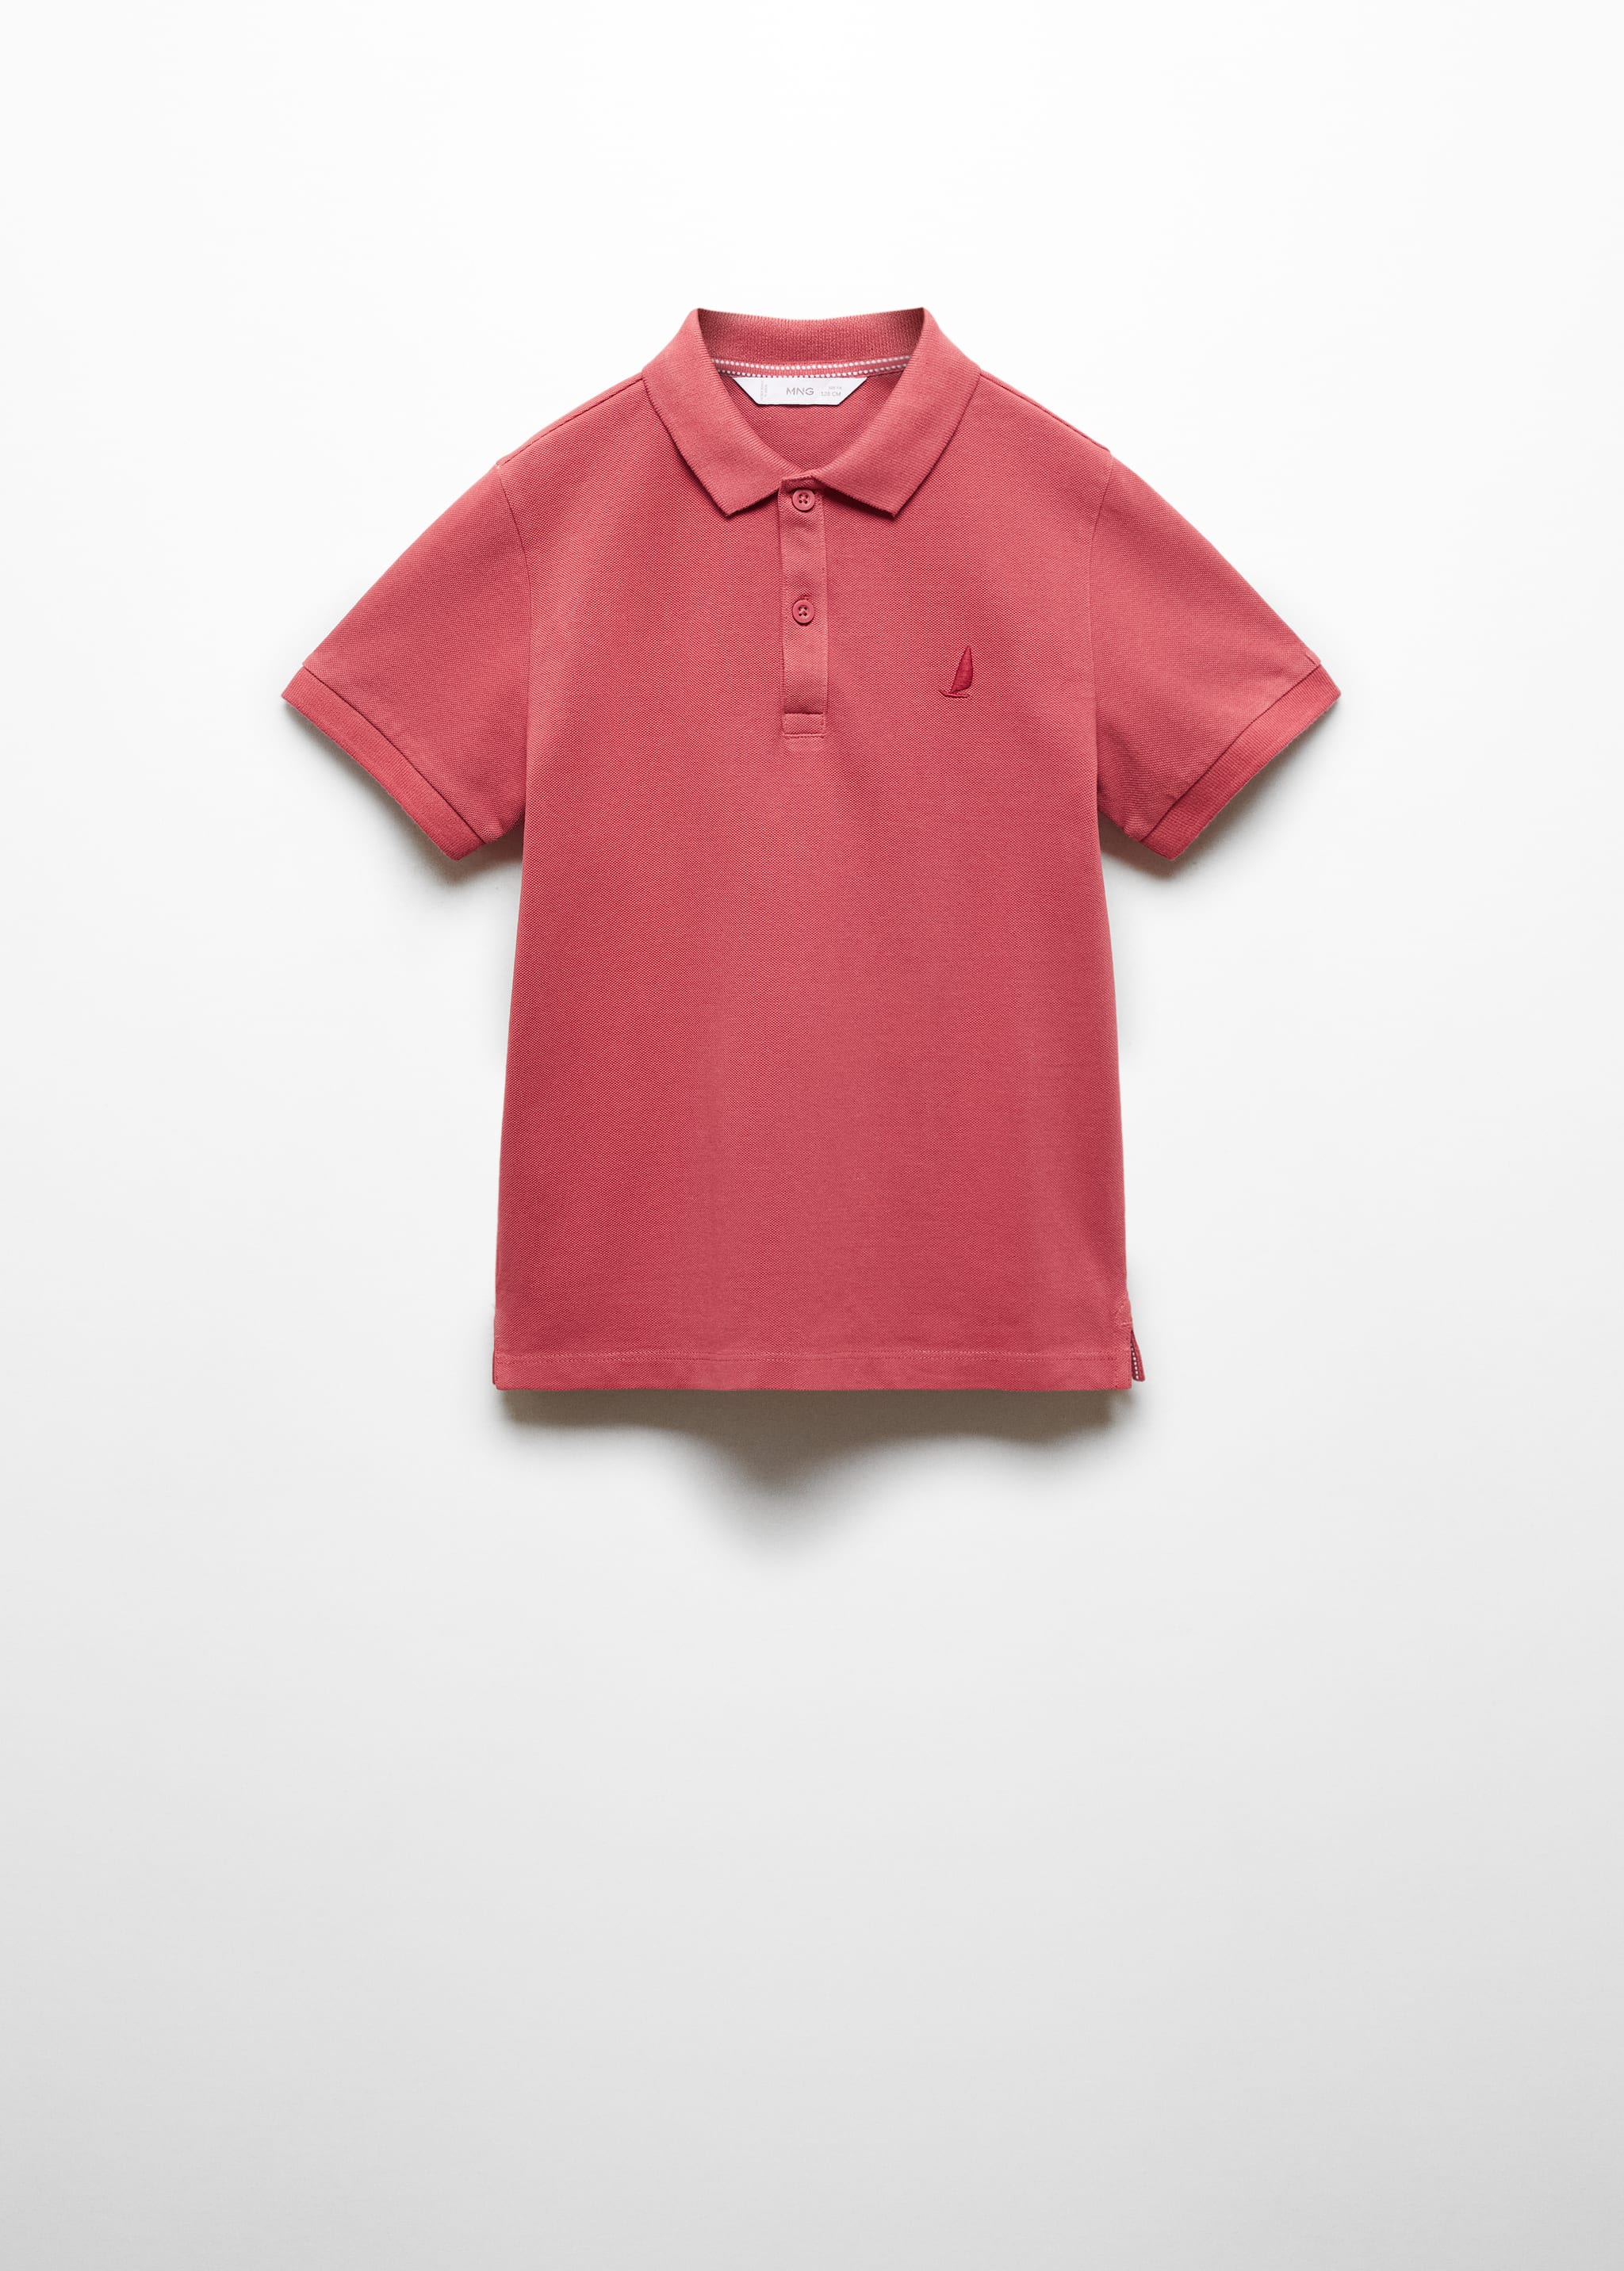 100% cotton polo shirt - Article without model